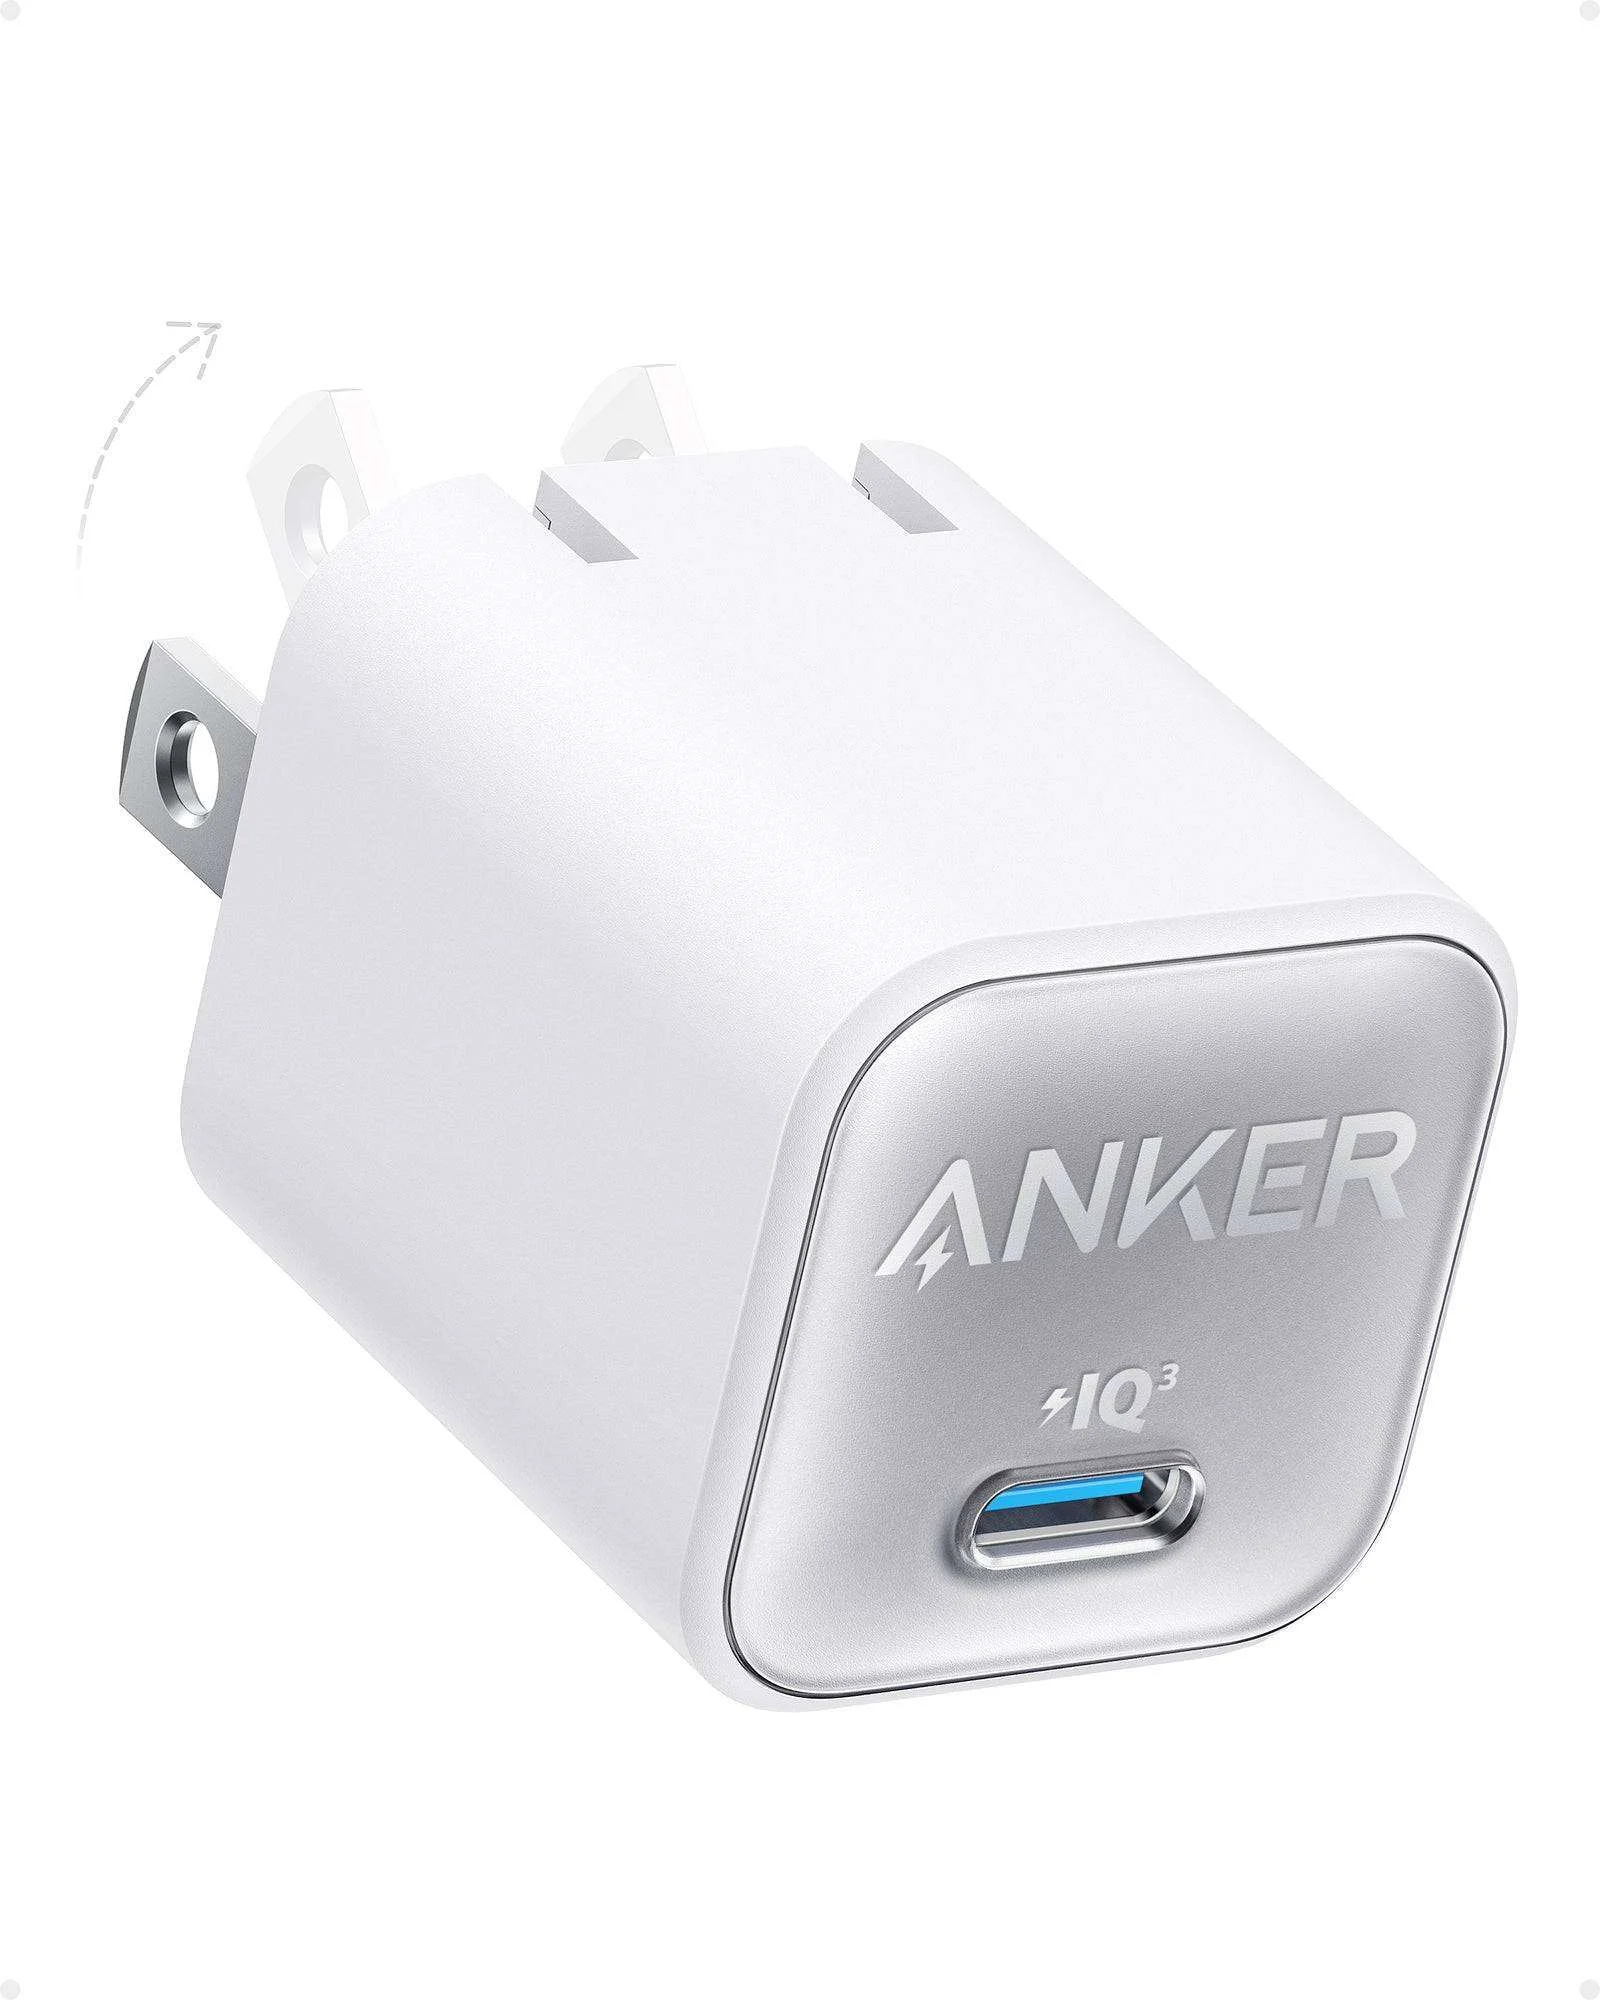 Anker 511 Charger (Nano 3, 30W) Series 5 With USB C to Lightning Cable – B2152